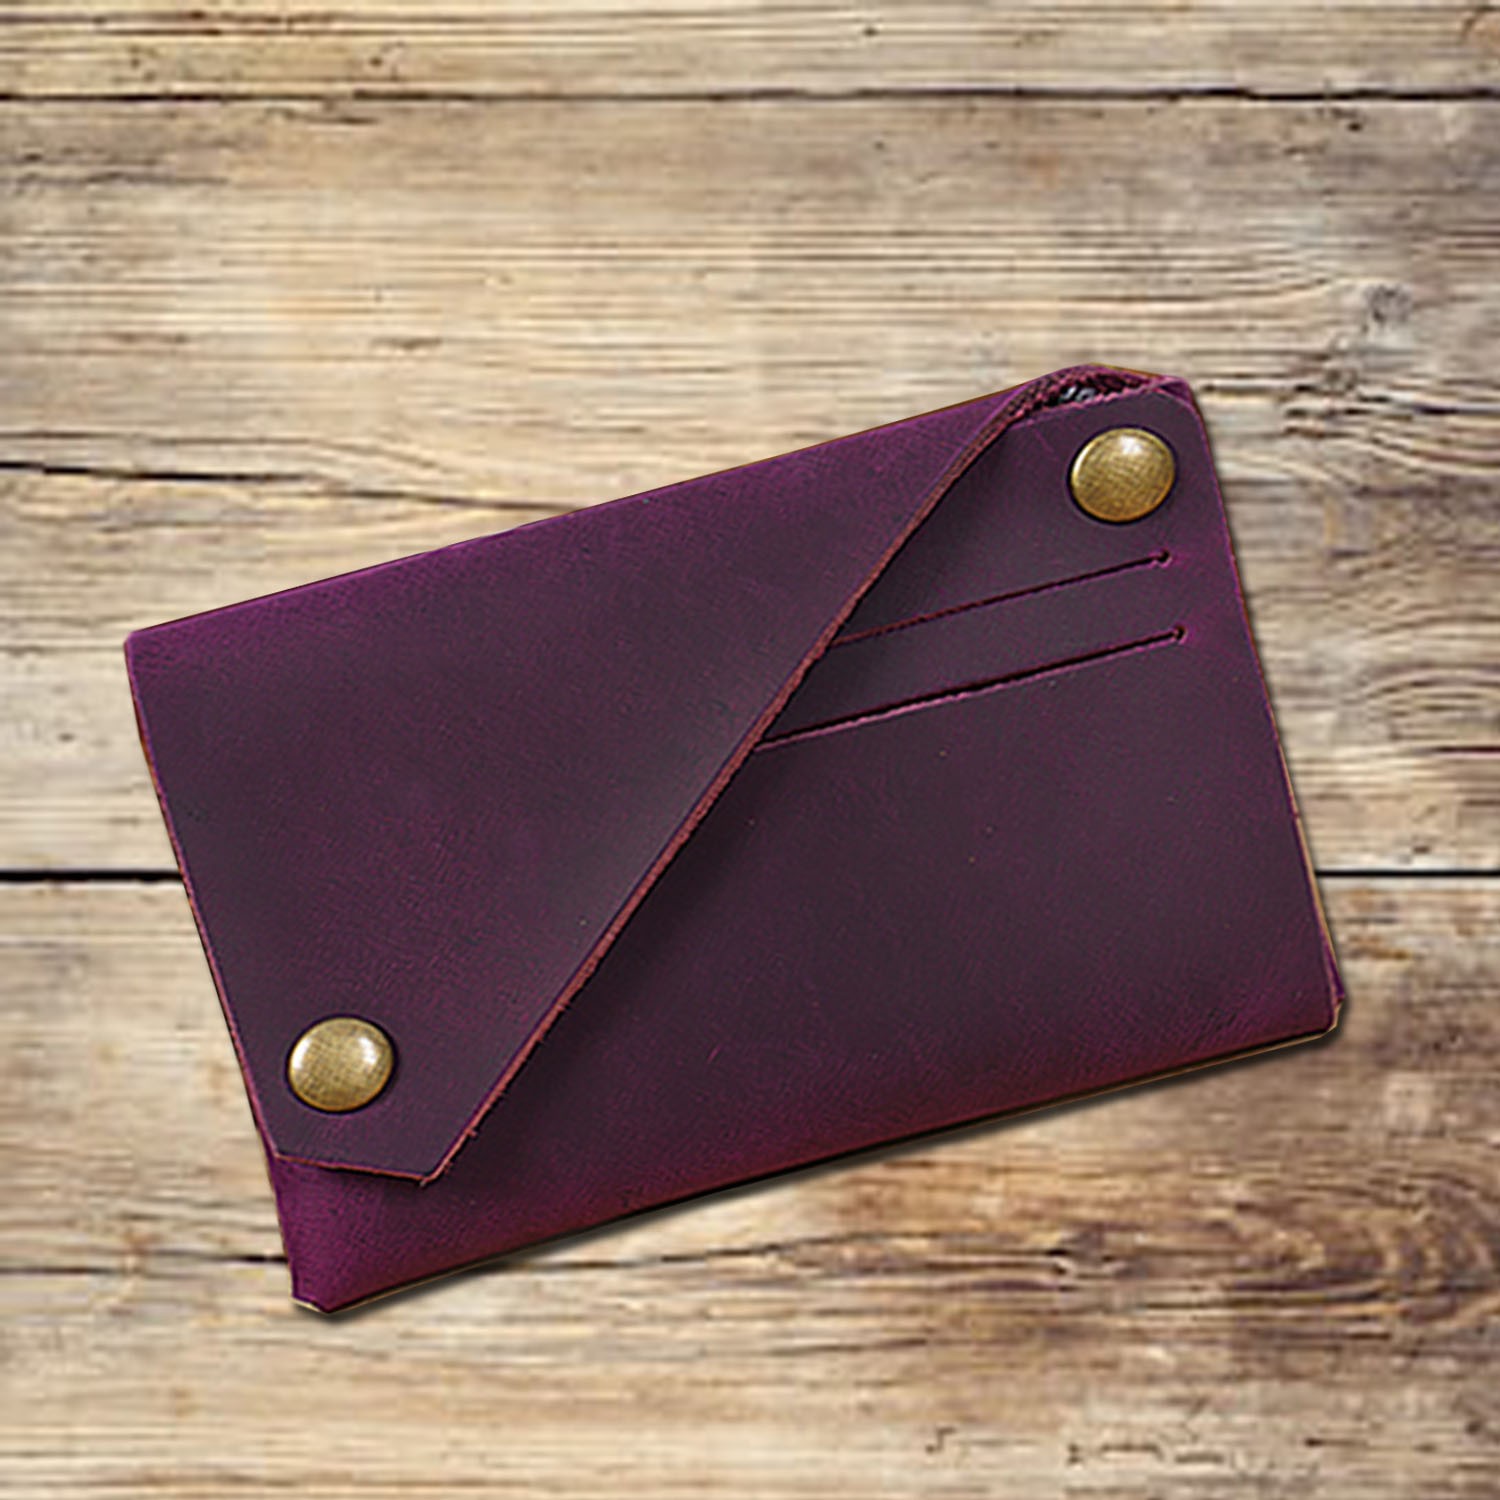 Handmade folded red leather card wallet